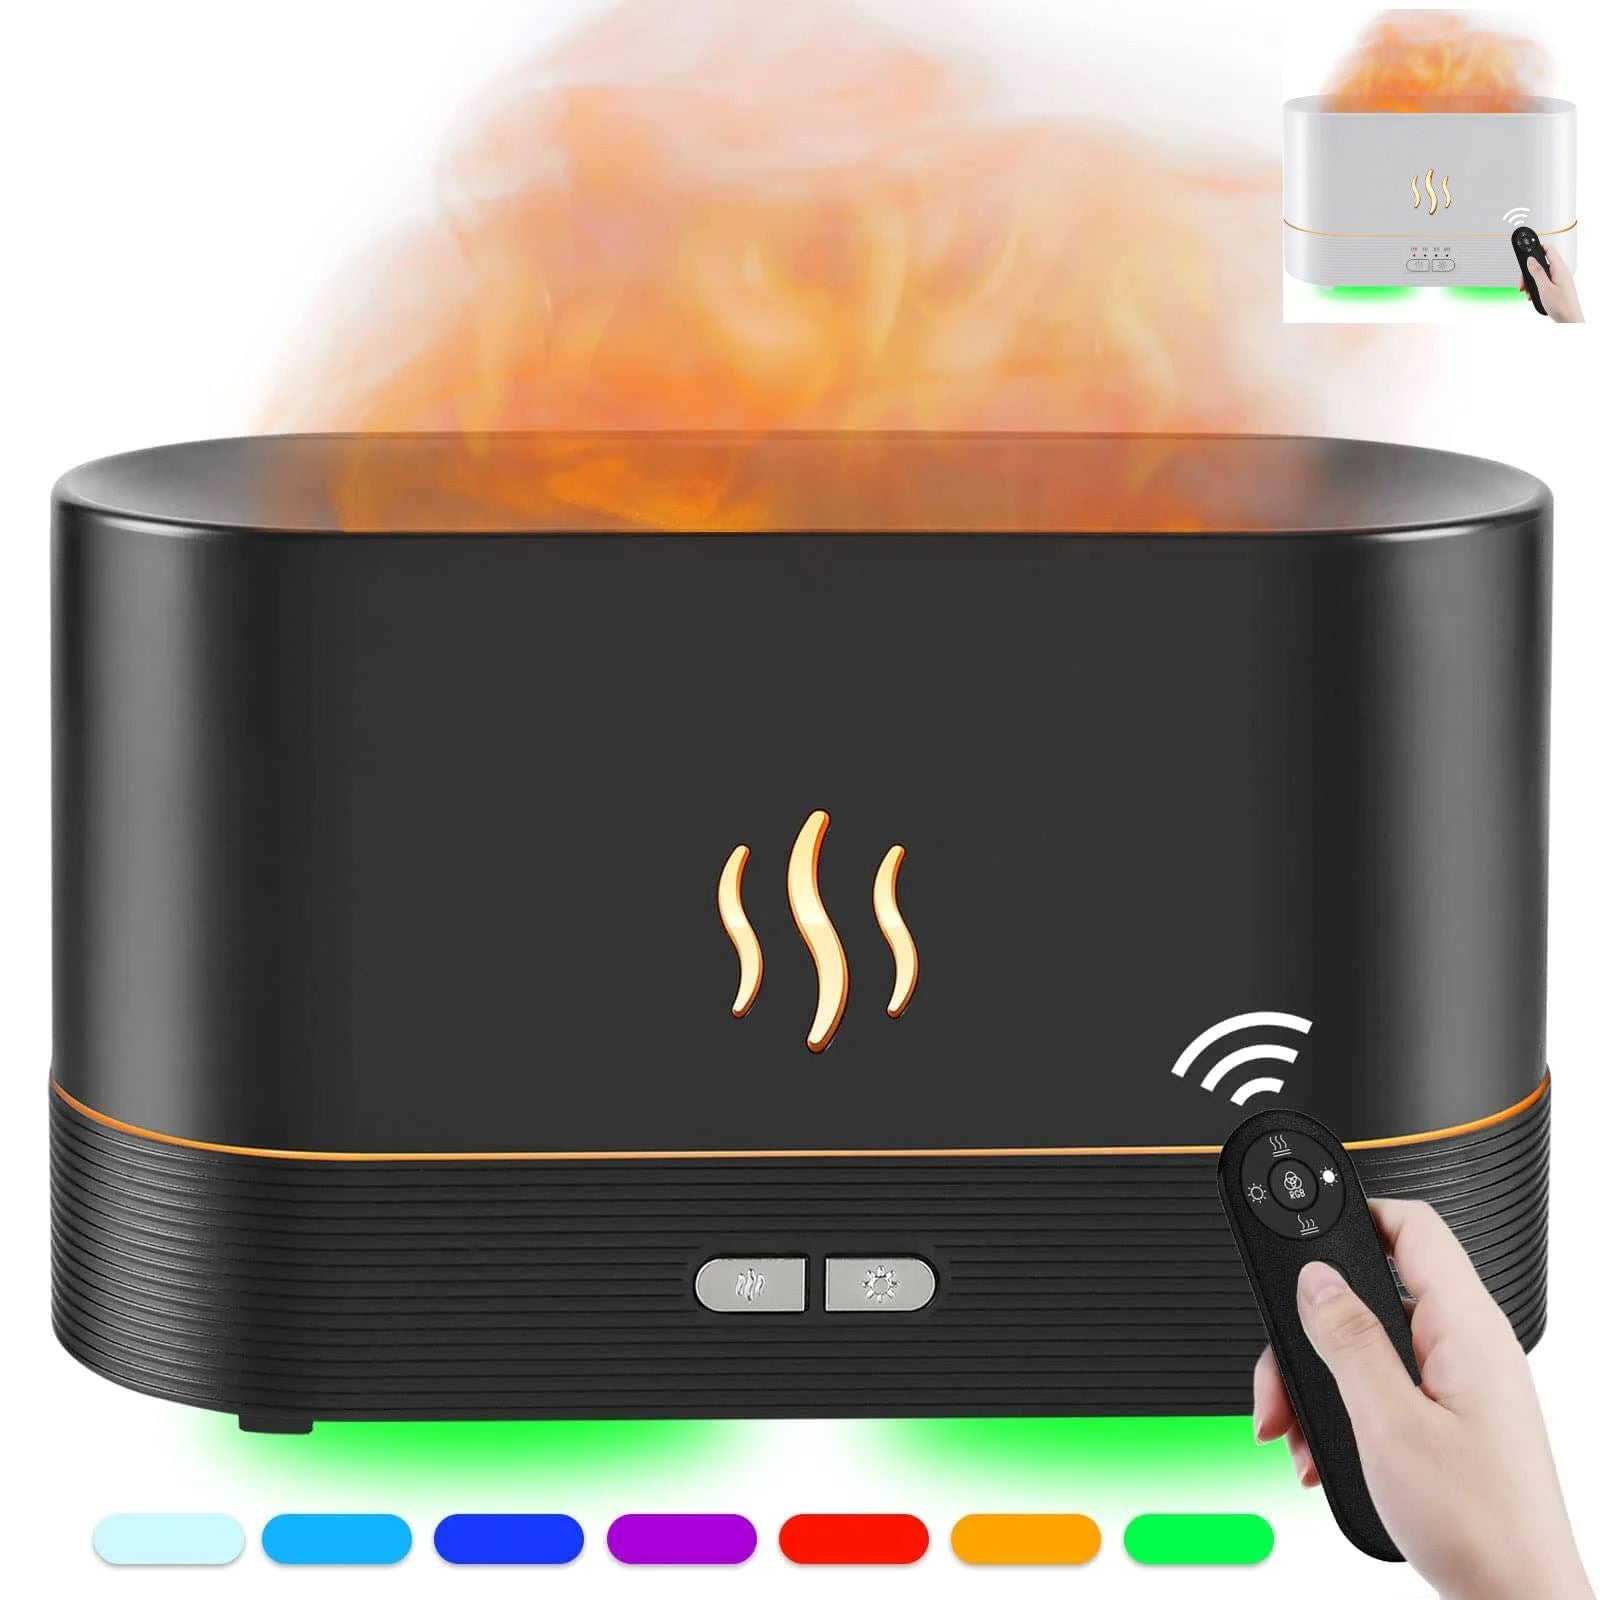 PLWMax™ 300ml 7 Colors 3D Flame Mist Essential Oil Diffuser: Aroma Air Humidifier flame mist diffuser PLWMax™ Jet Black 